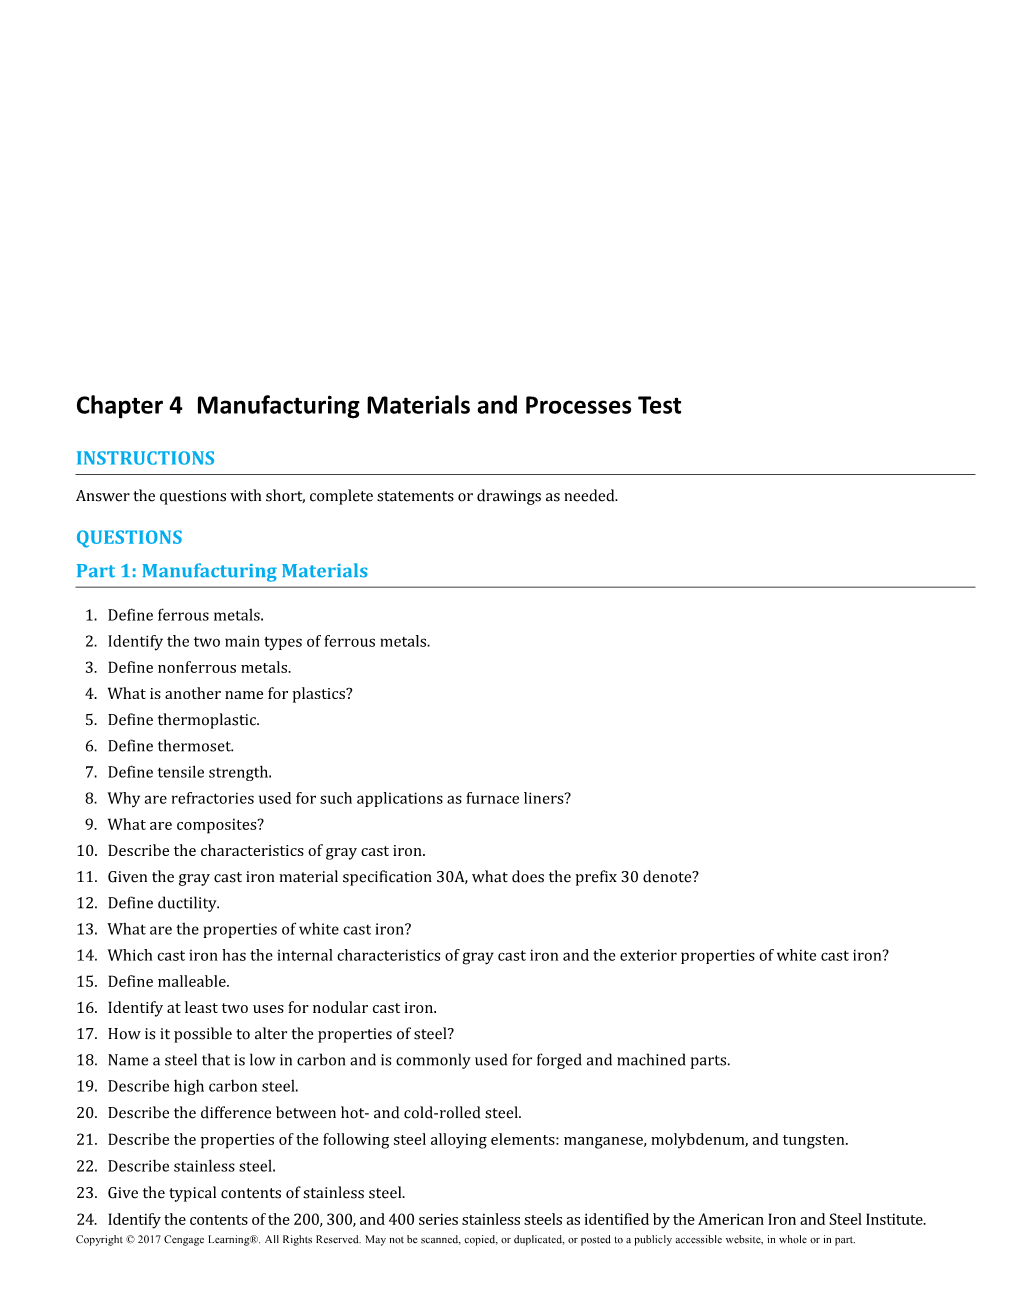 Chapter 4Manufacturing Materials and Processes Test